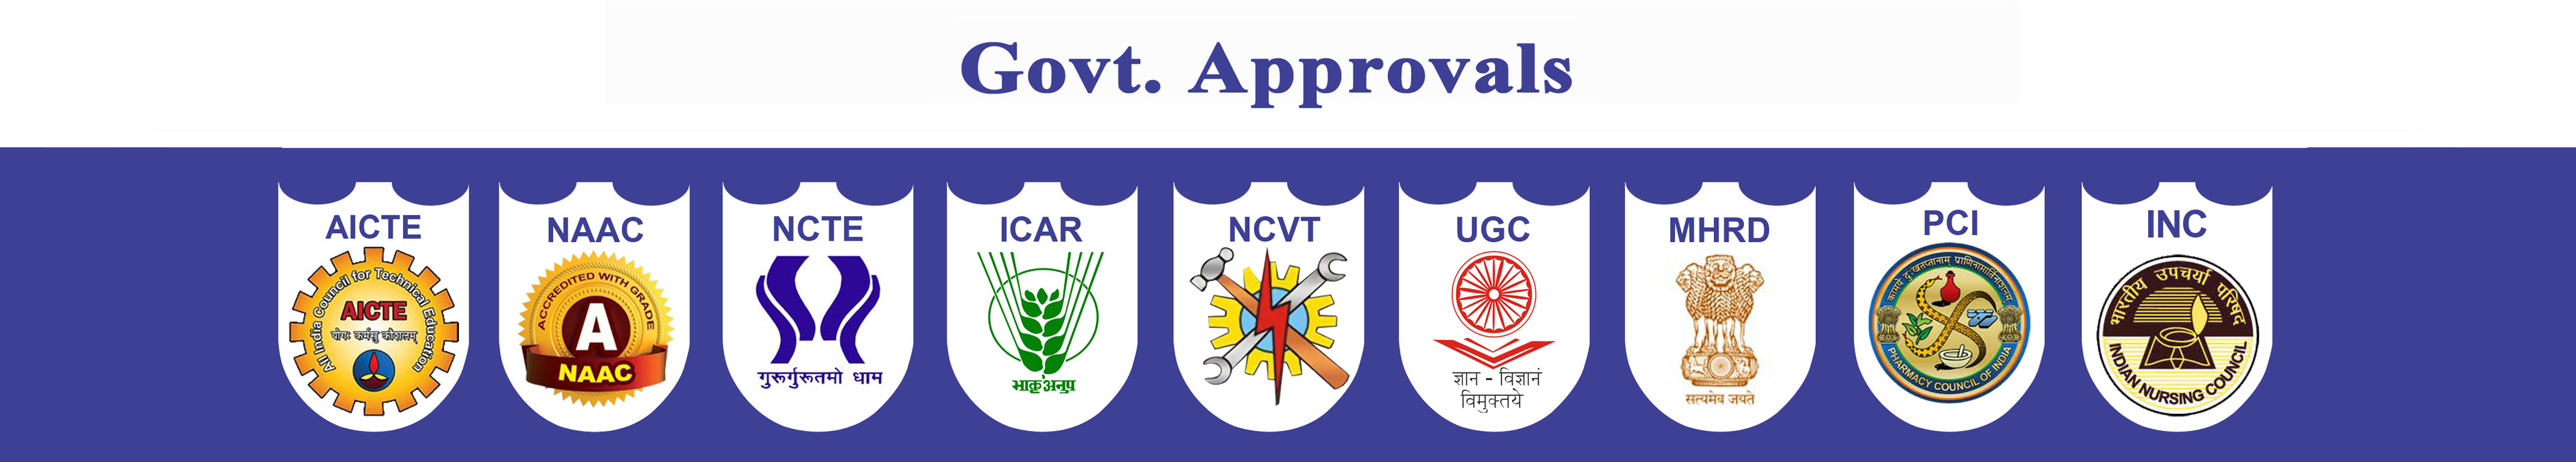 government approvals bscc colleges